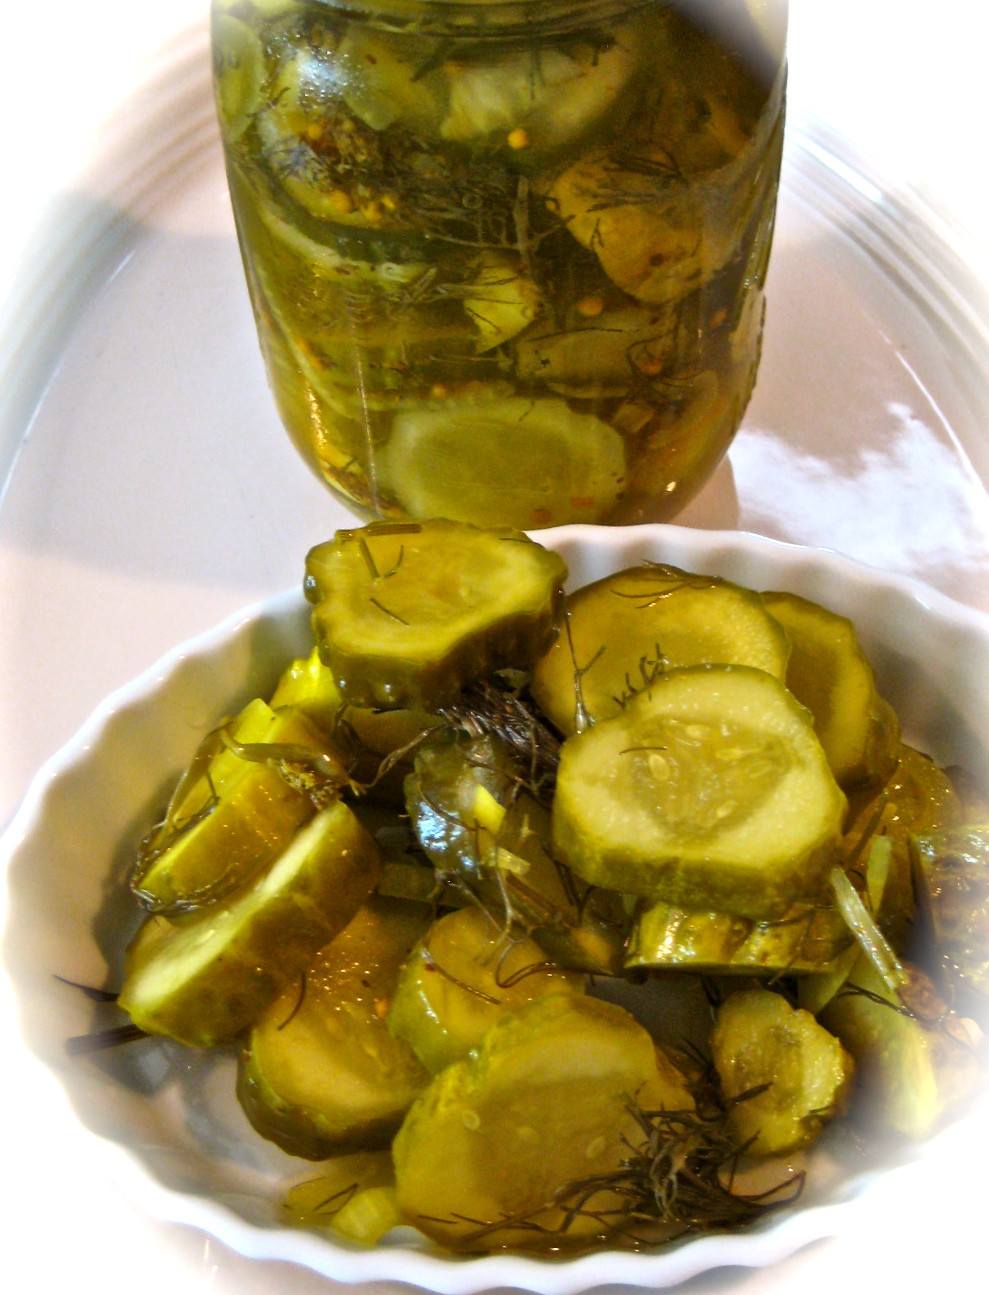 Bread And Butter Pickles Recipe No Canning
 Karen B s Cooking Made Easy Easy Refrigerator Bread and